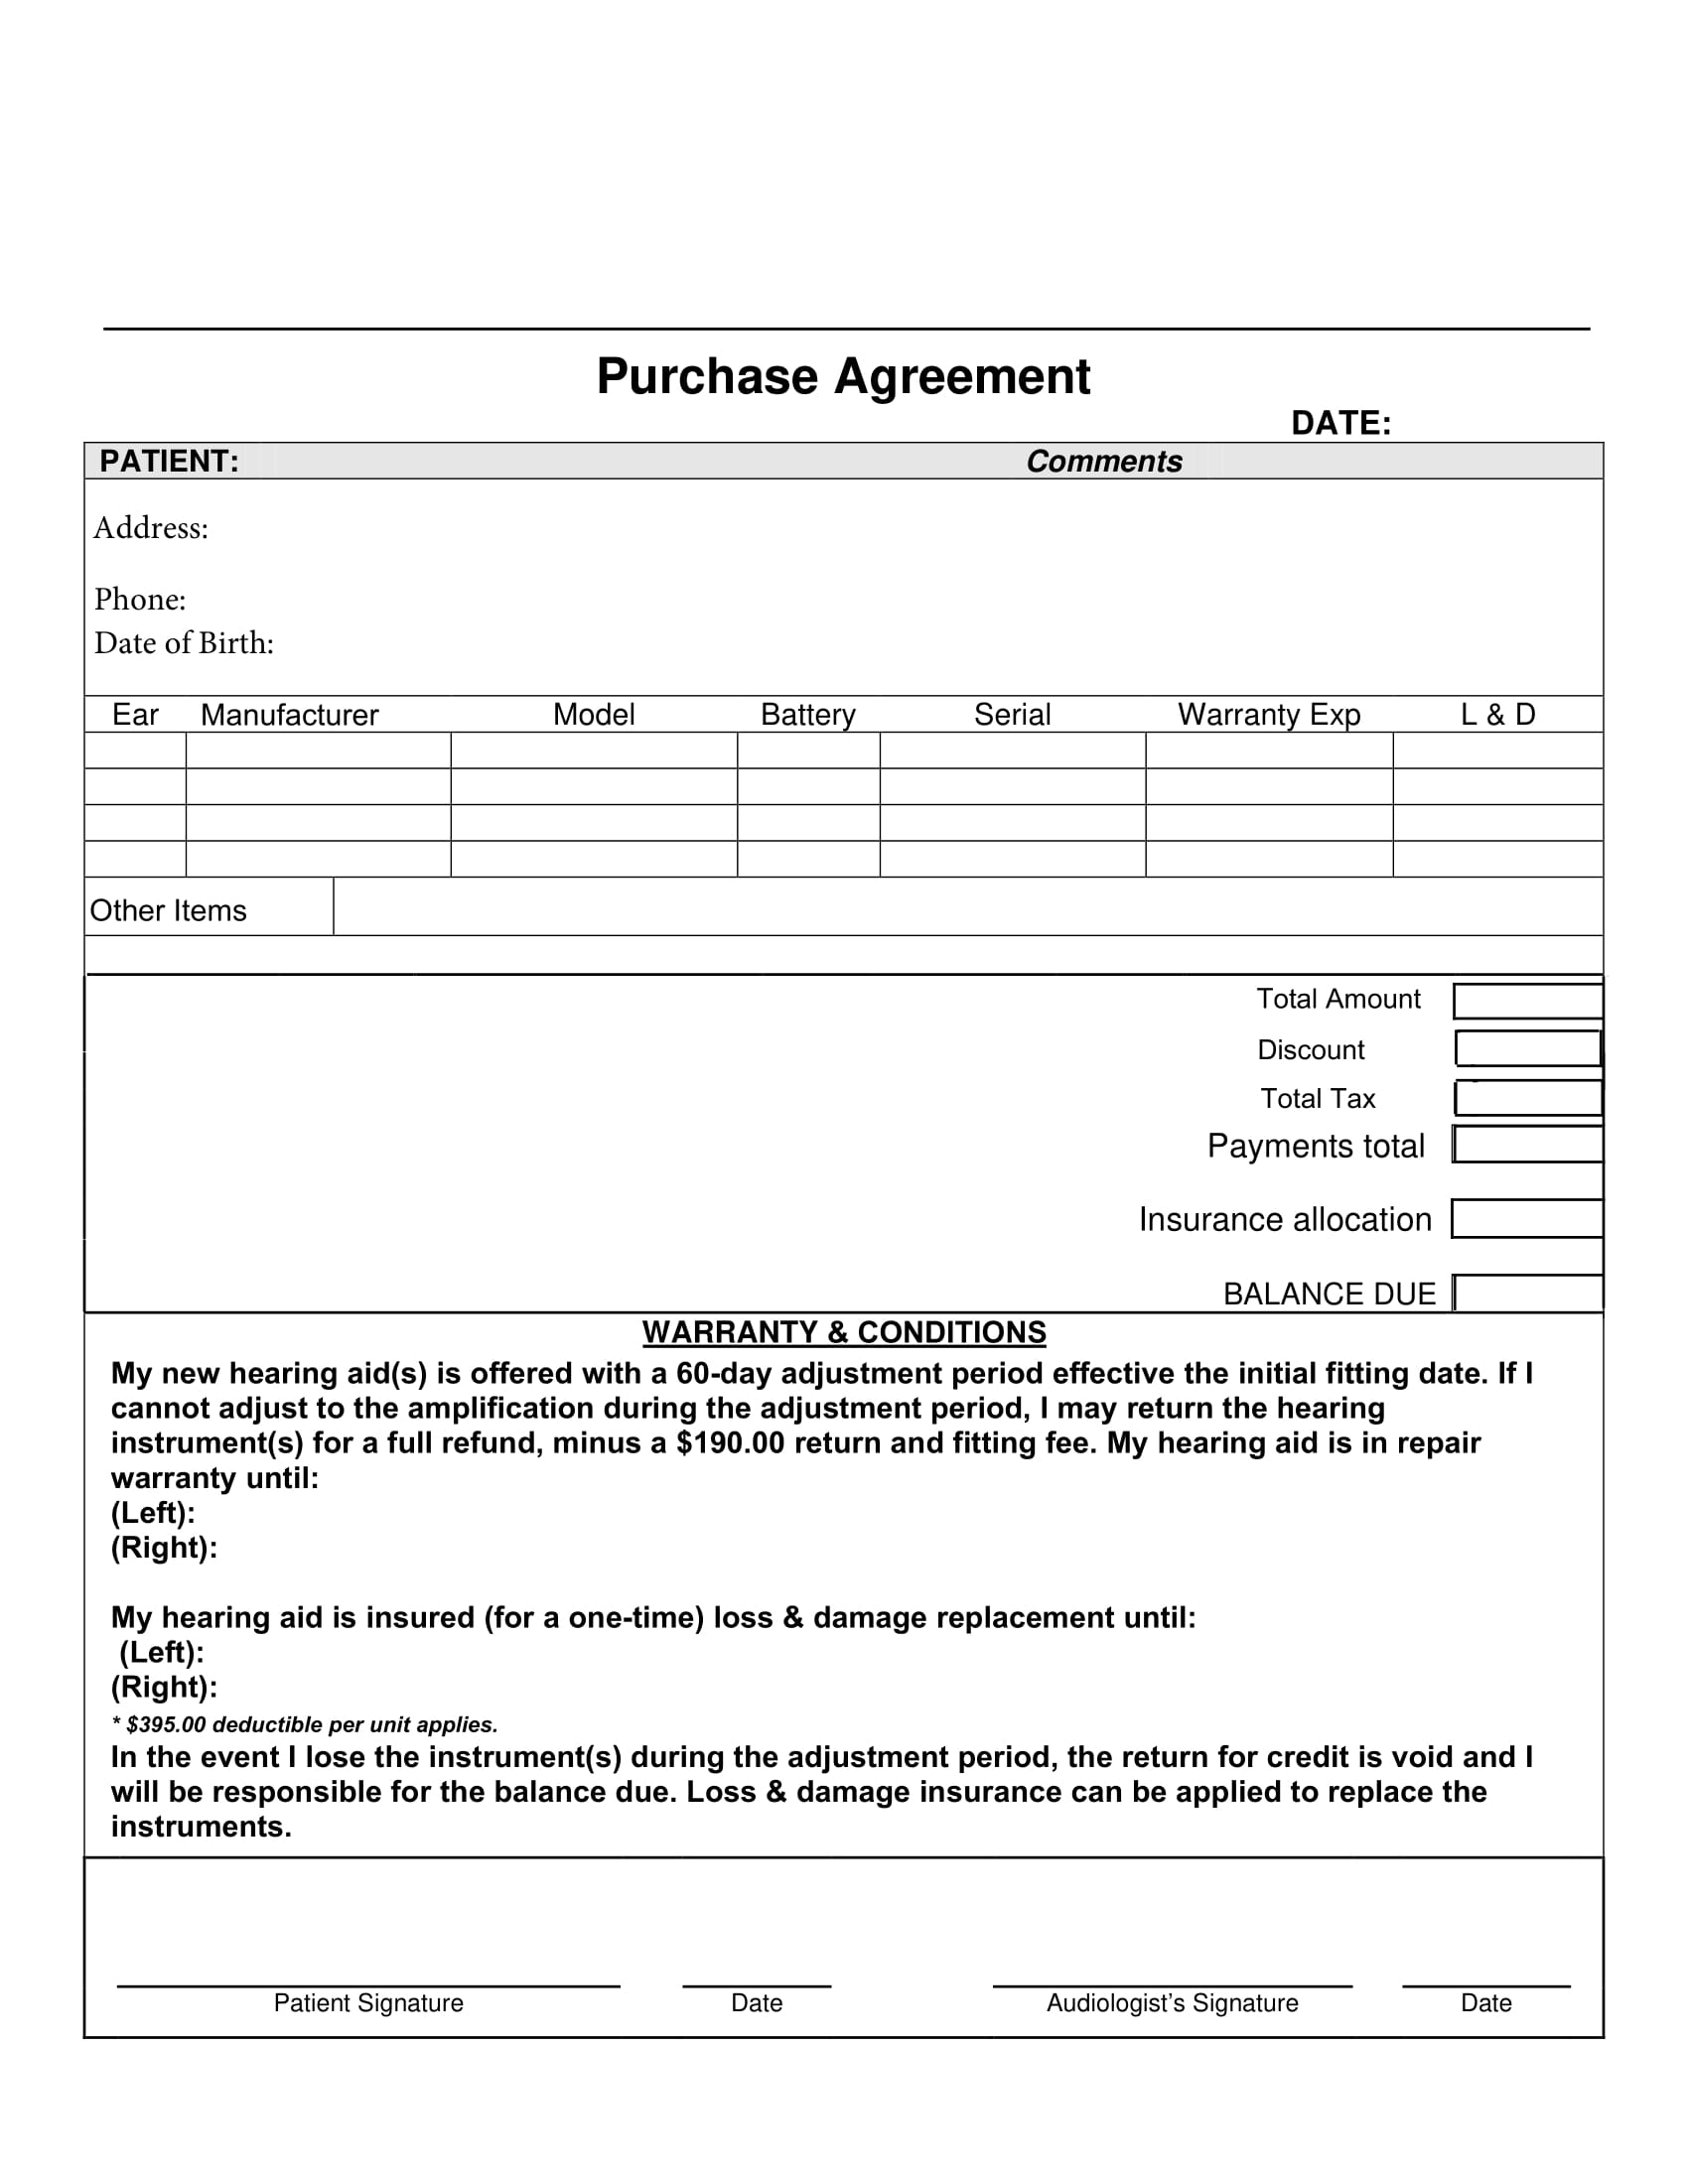 Purchase Agreement 2 2022 04 05 1 